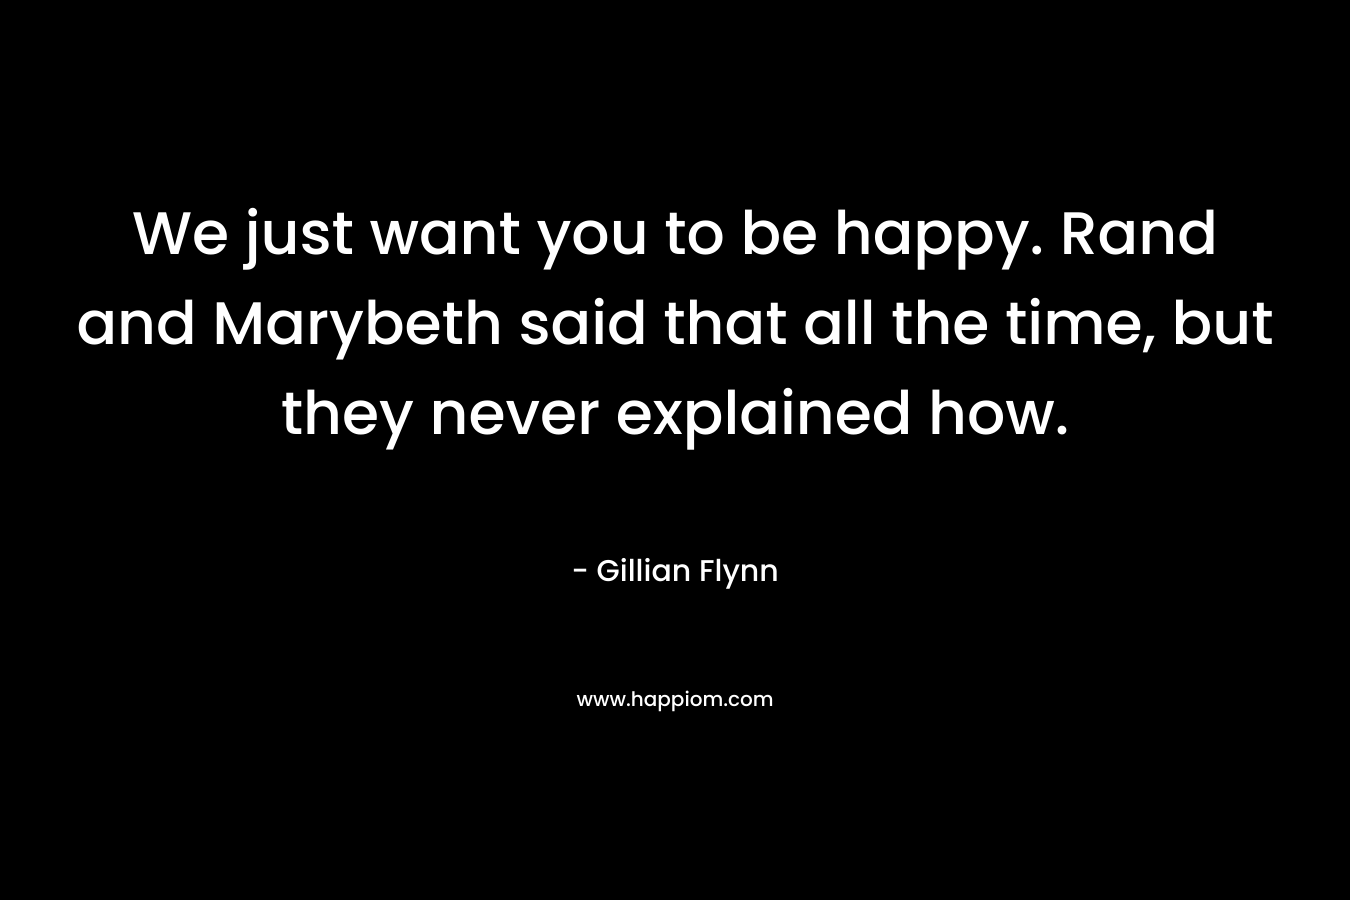 We just want you to be happy. Rand and Marybeth said that all the time, but they never explained how. – Gillian Flynn